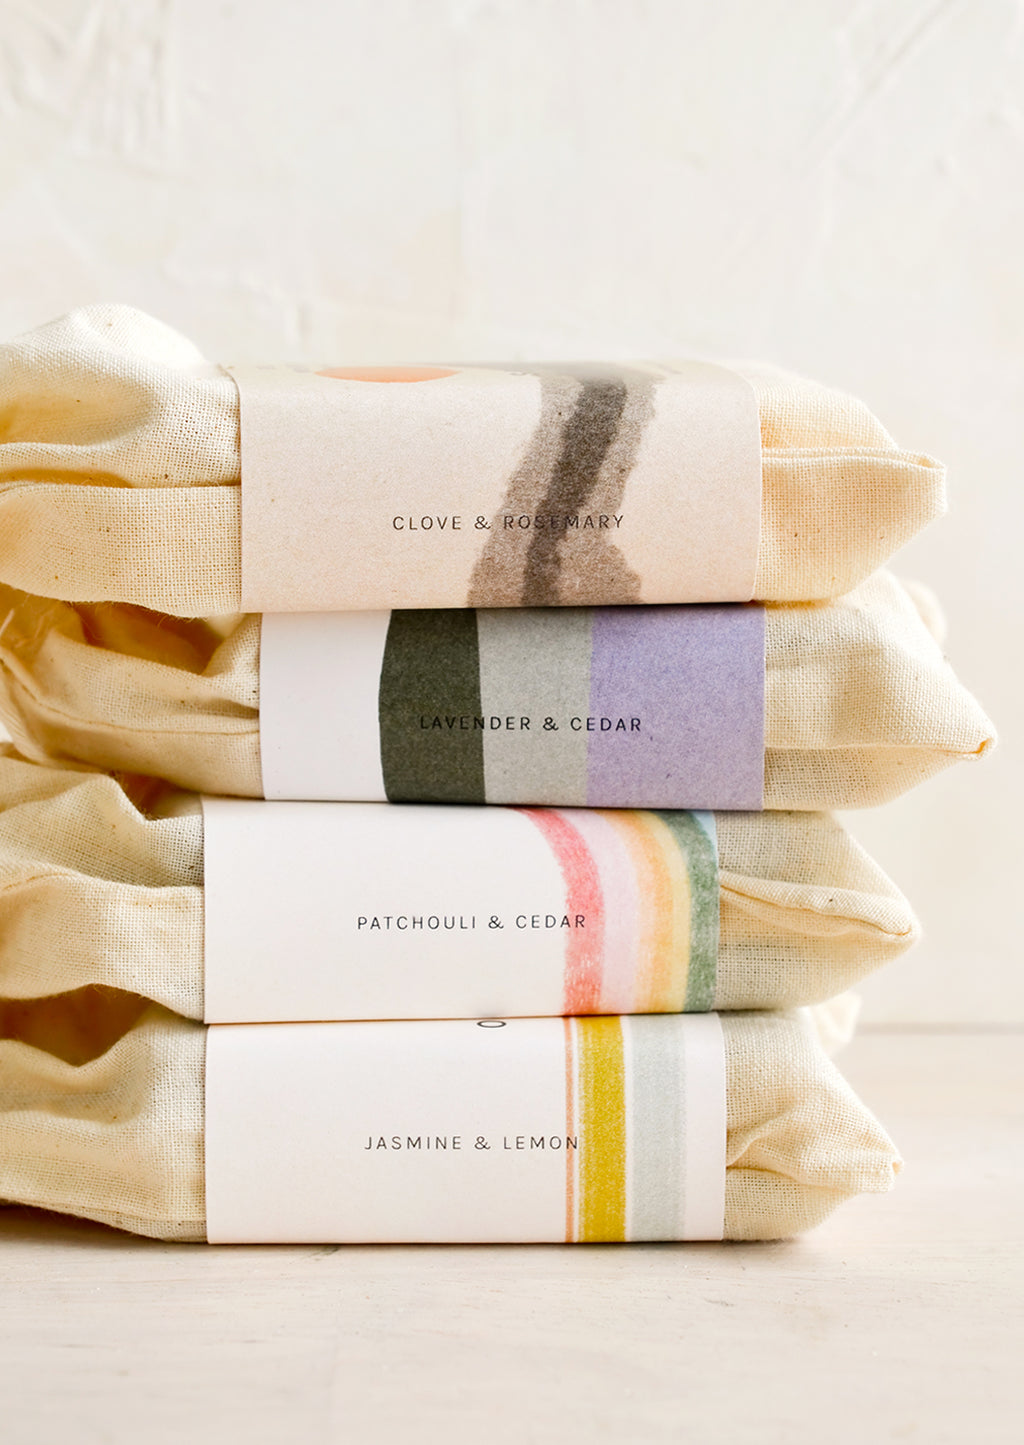 2: A stack of bar soaps in labeled muslin pouches.